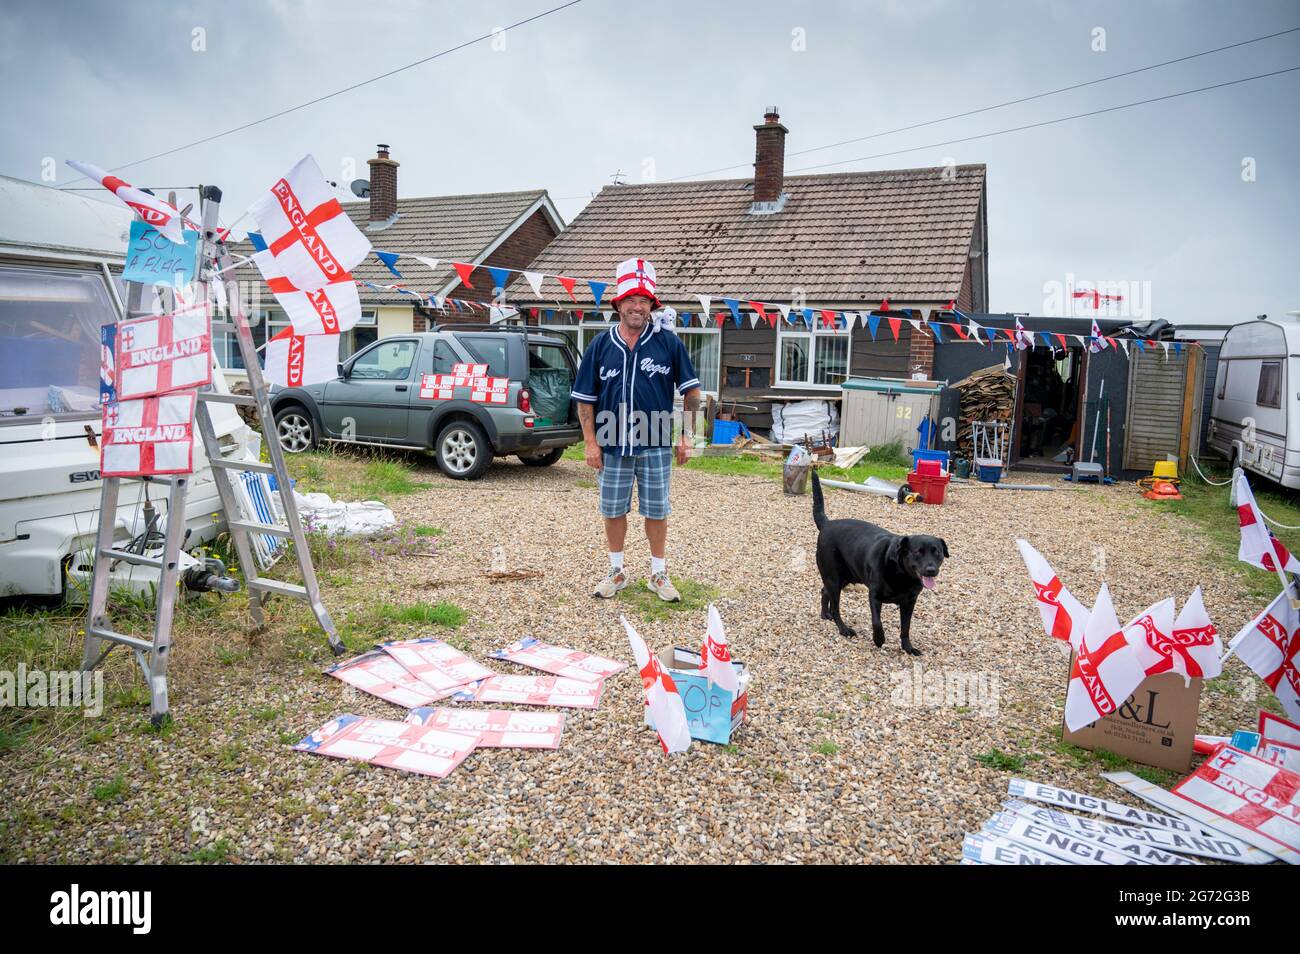 Trimingham, North Norfolk, UK. 10th July, 2021. A man sells England football flags, hats, signs and other supporters souvenirs from his driveway ahead of the England V Italy European Football Championships final at Wembley. Credit: Julian Eales/Alamy Live News Stock Photo